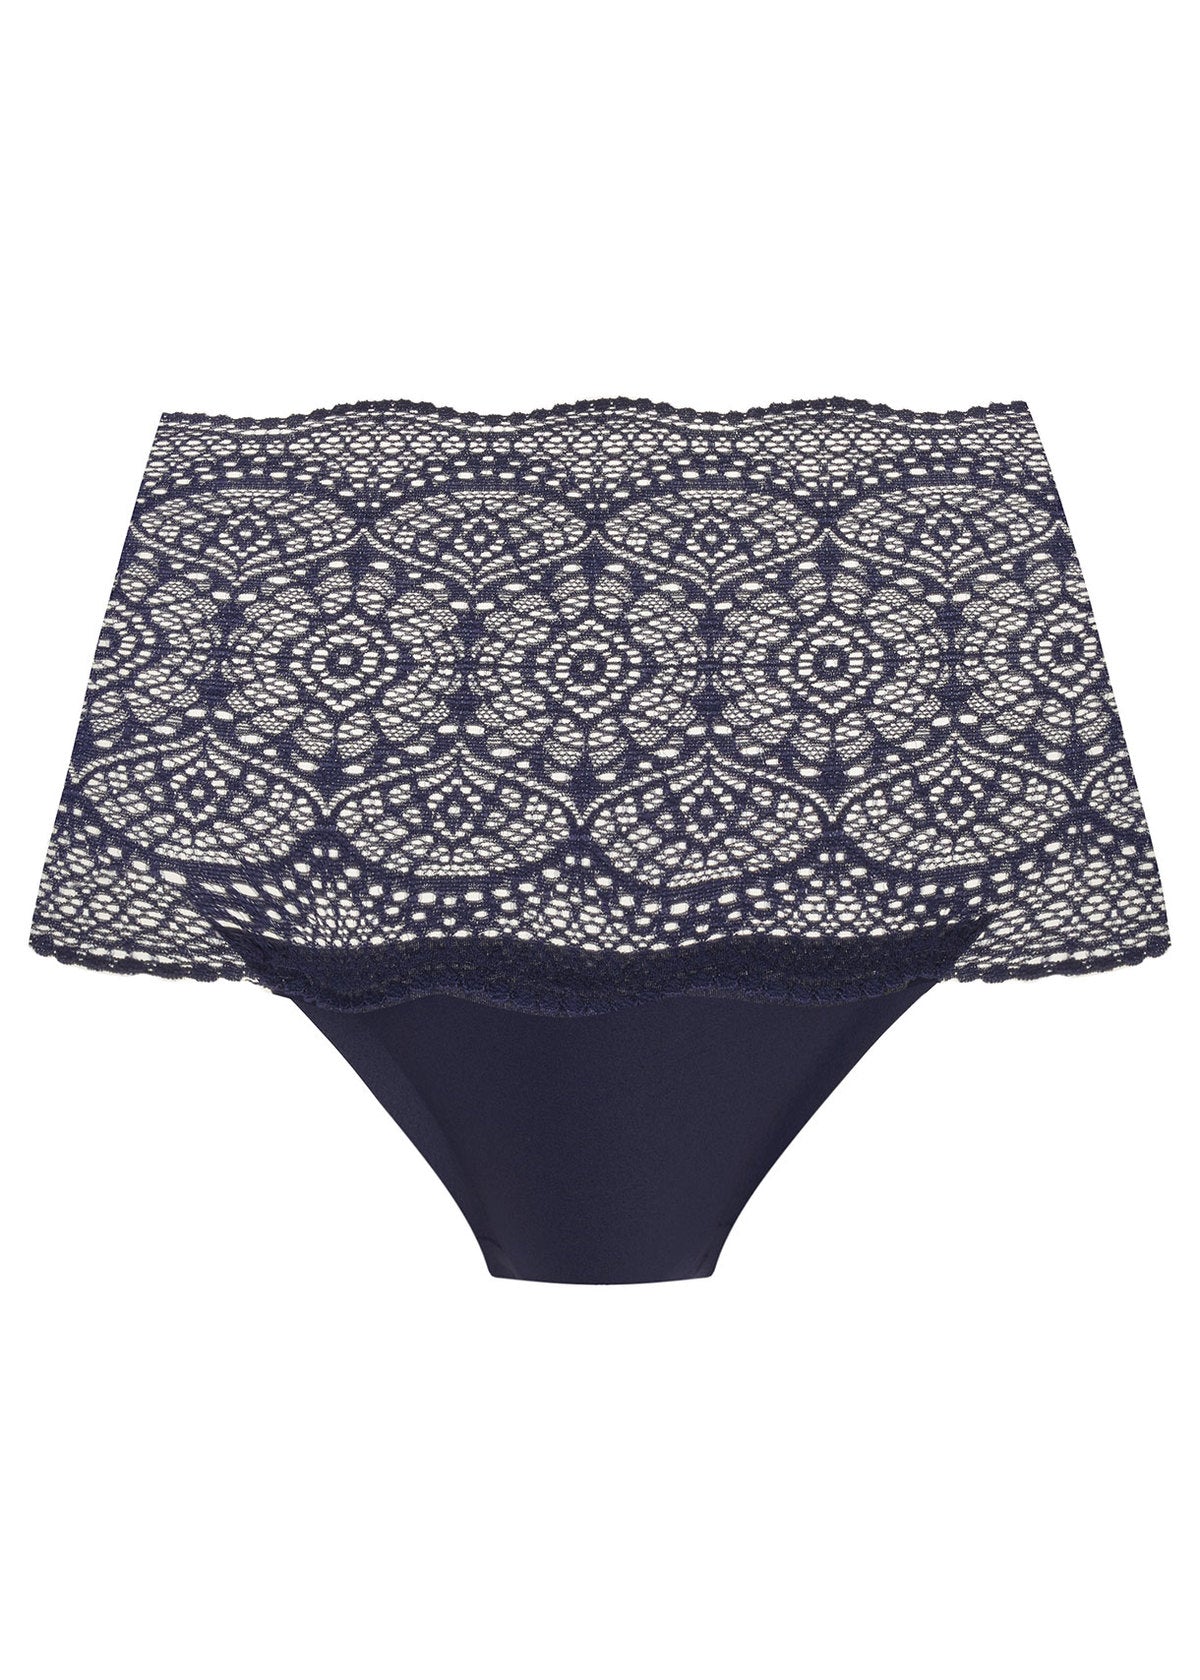 Brief in Steel Blue and Black with Leavers lace